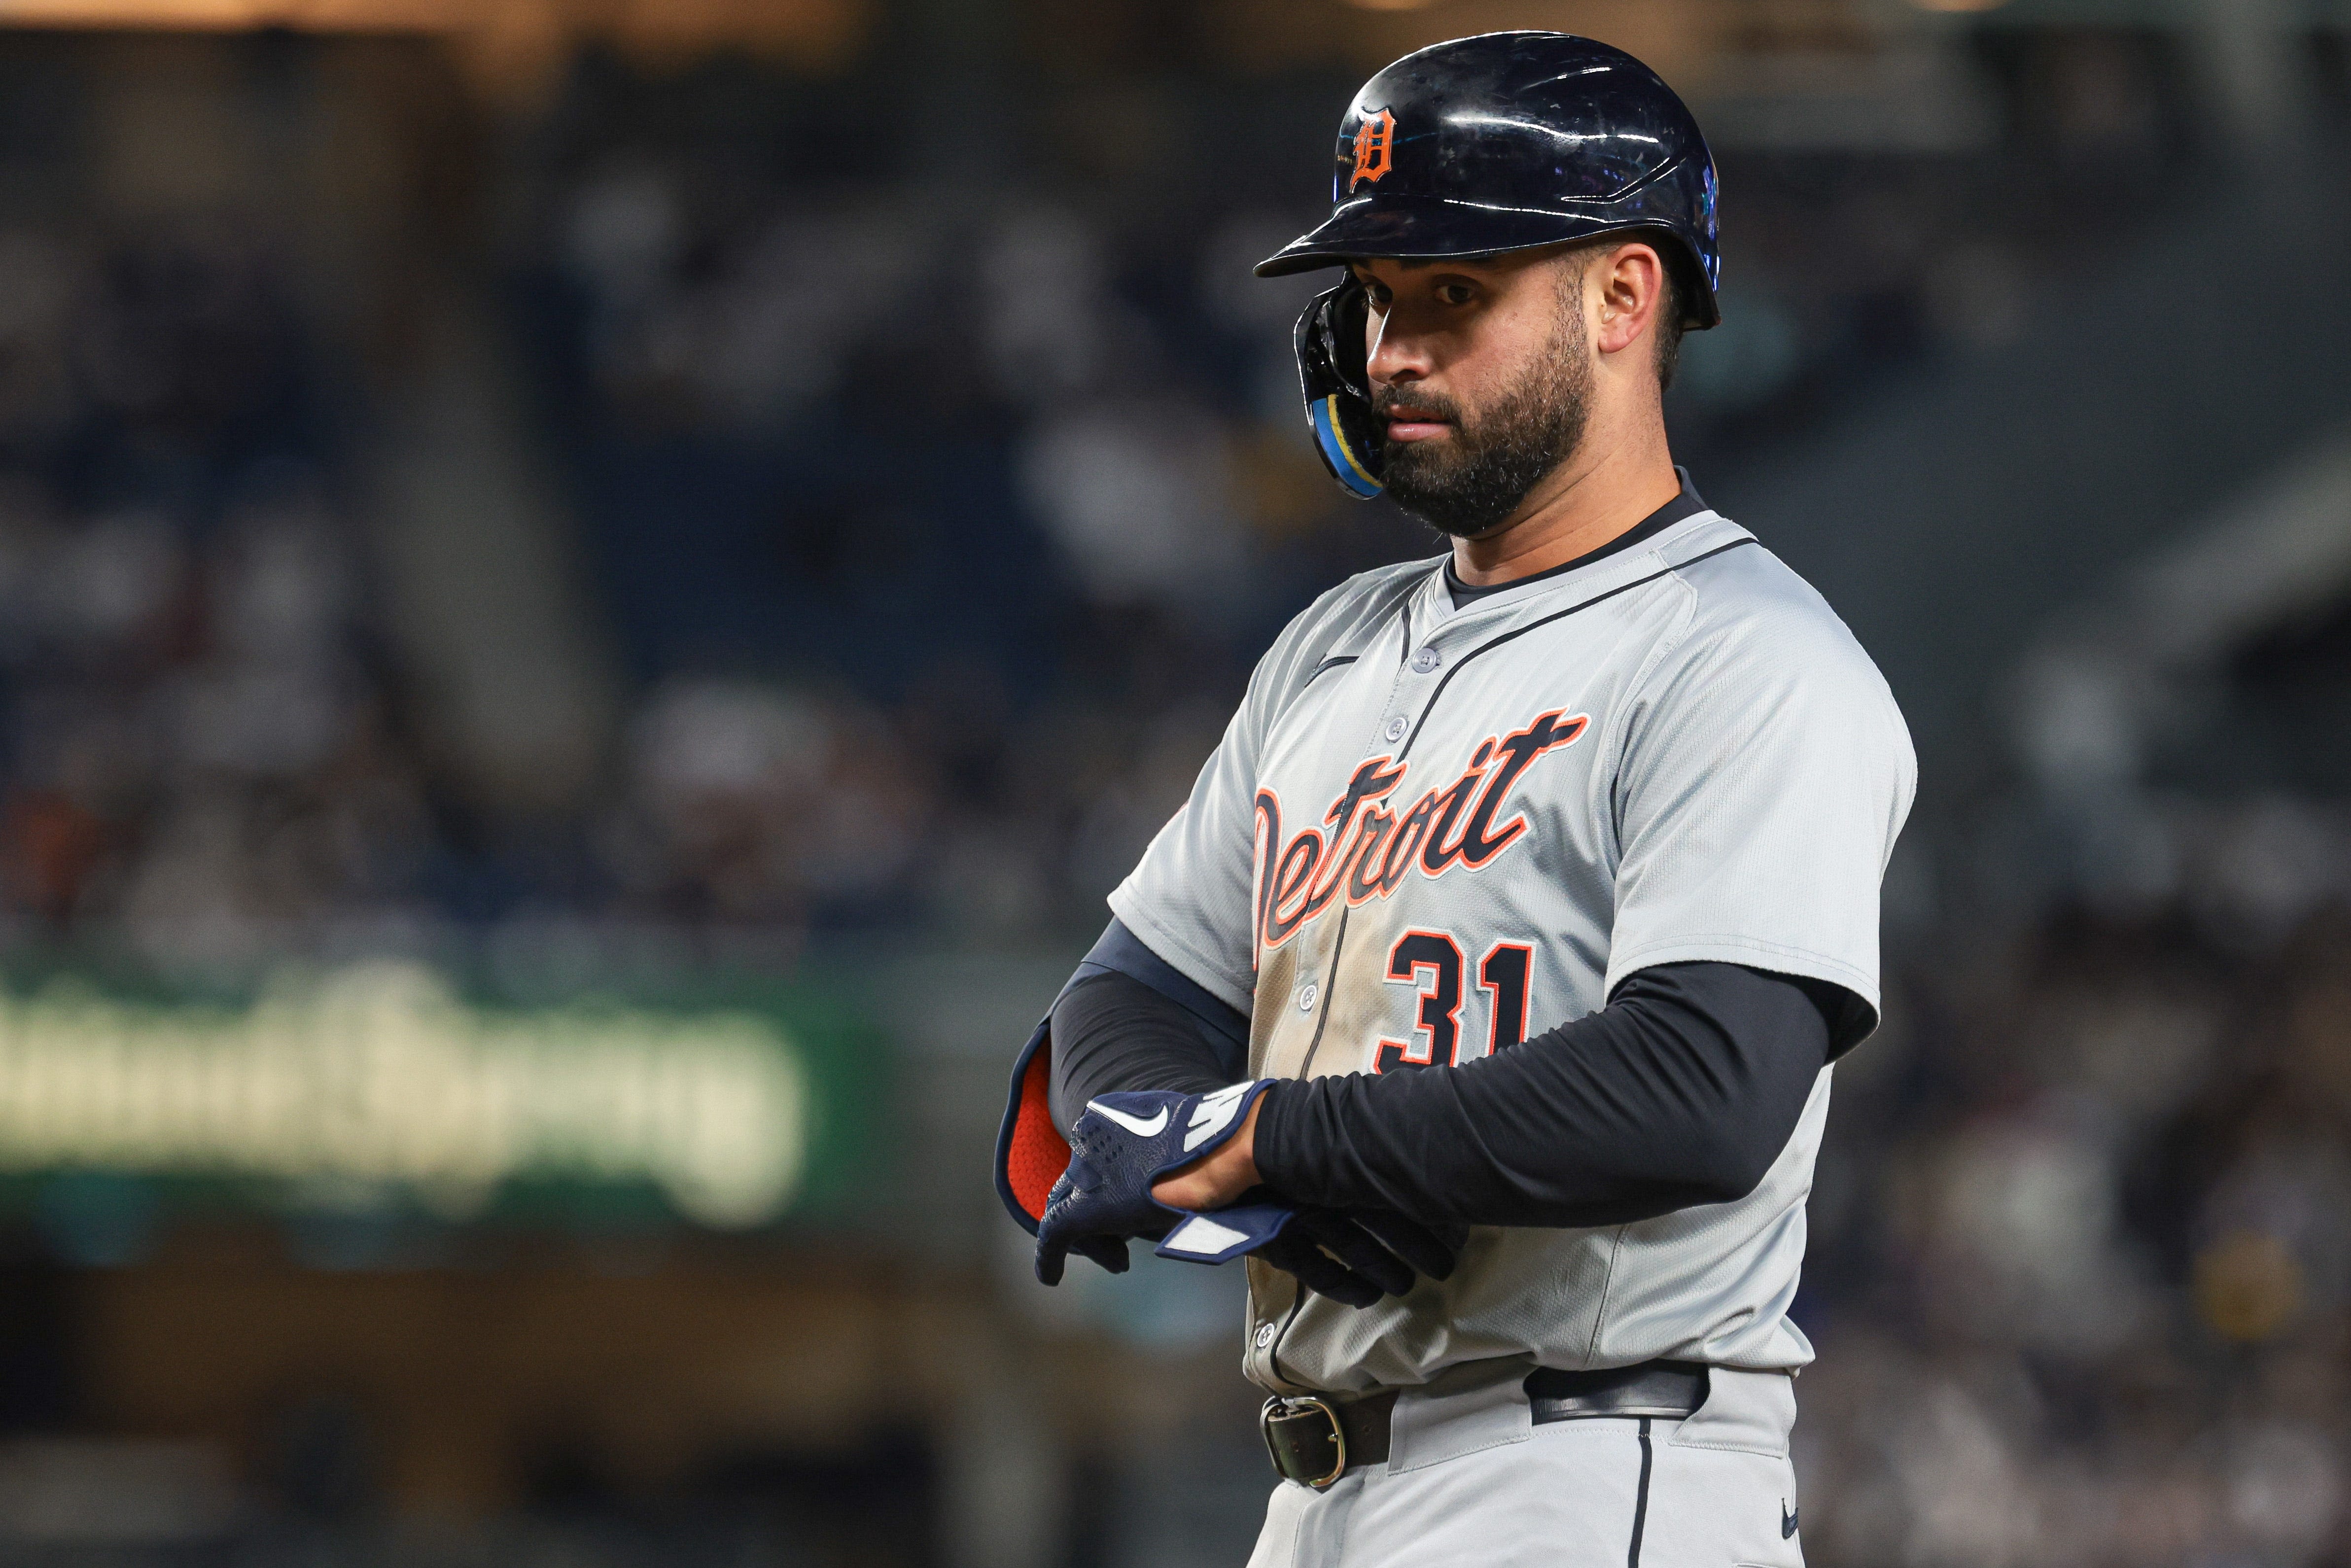 Missed scoring opportunities cost Detroit Tigers in 2-1 loss to New York Yankees